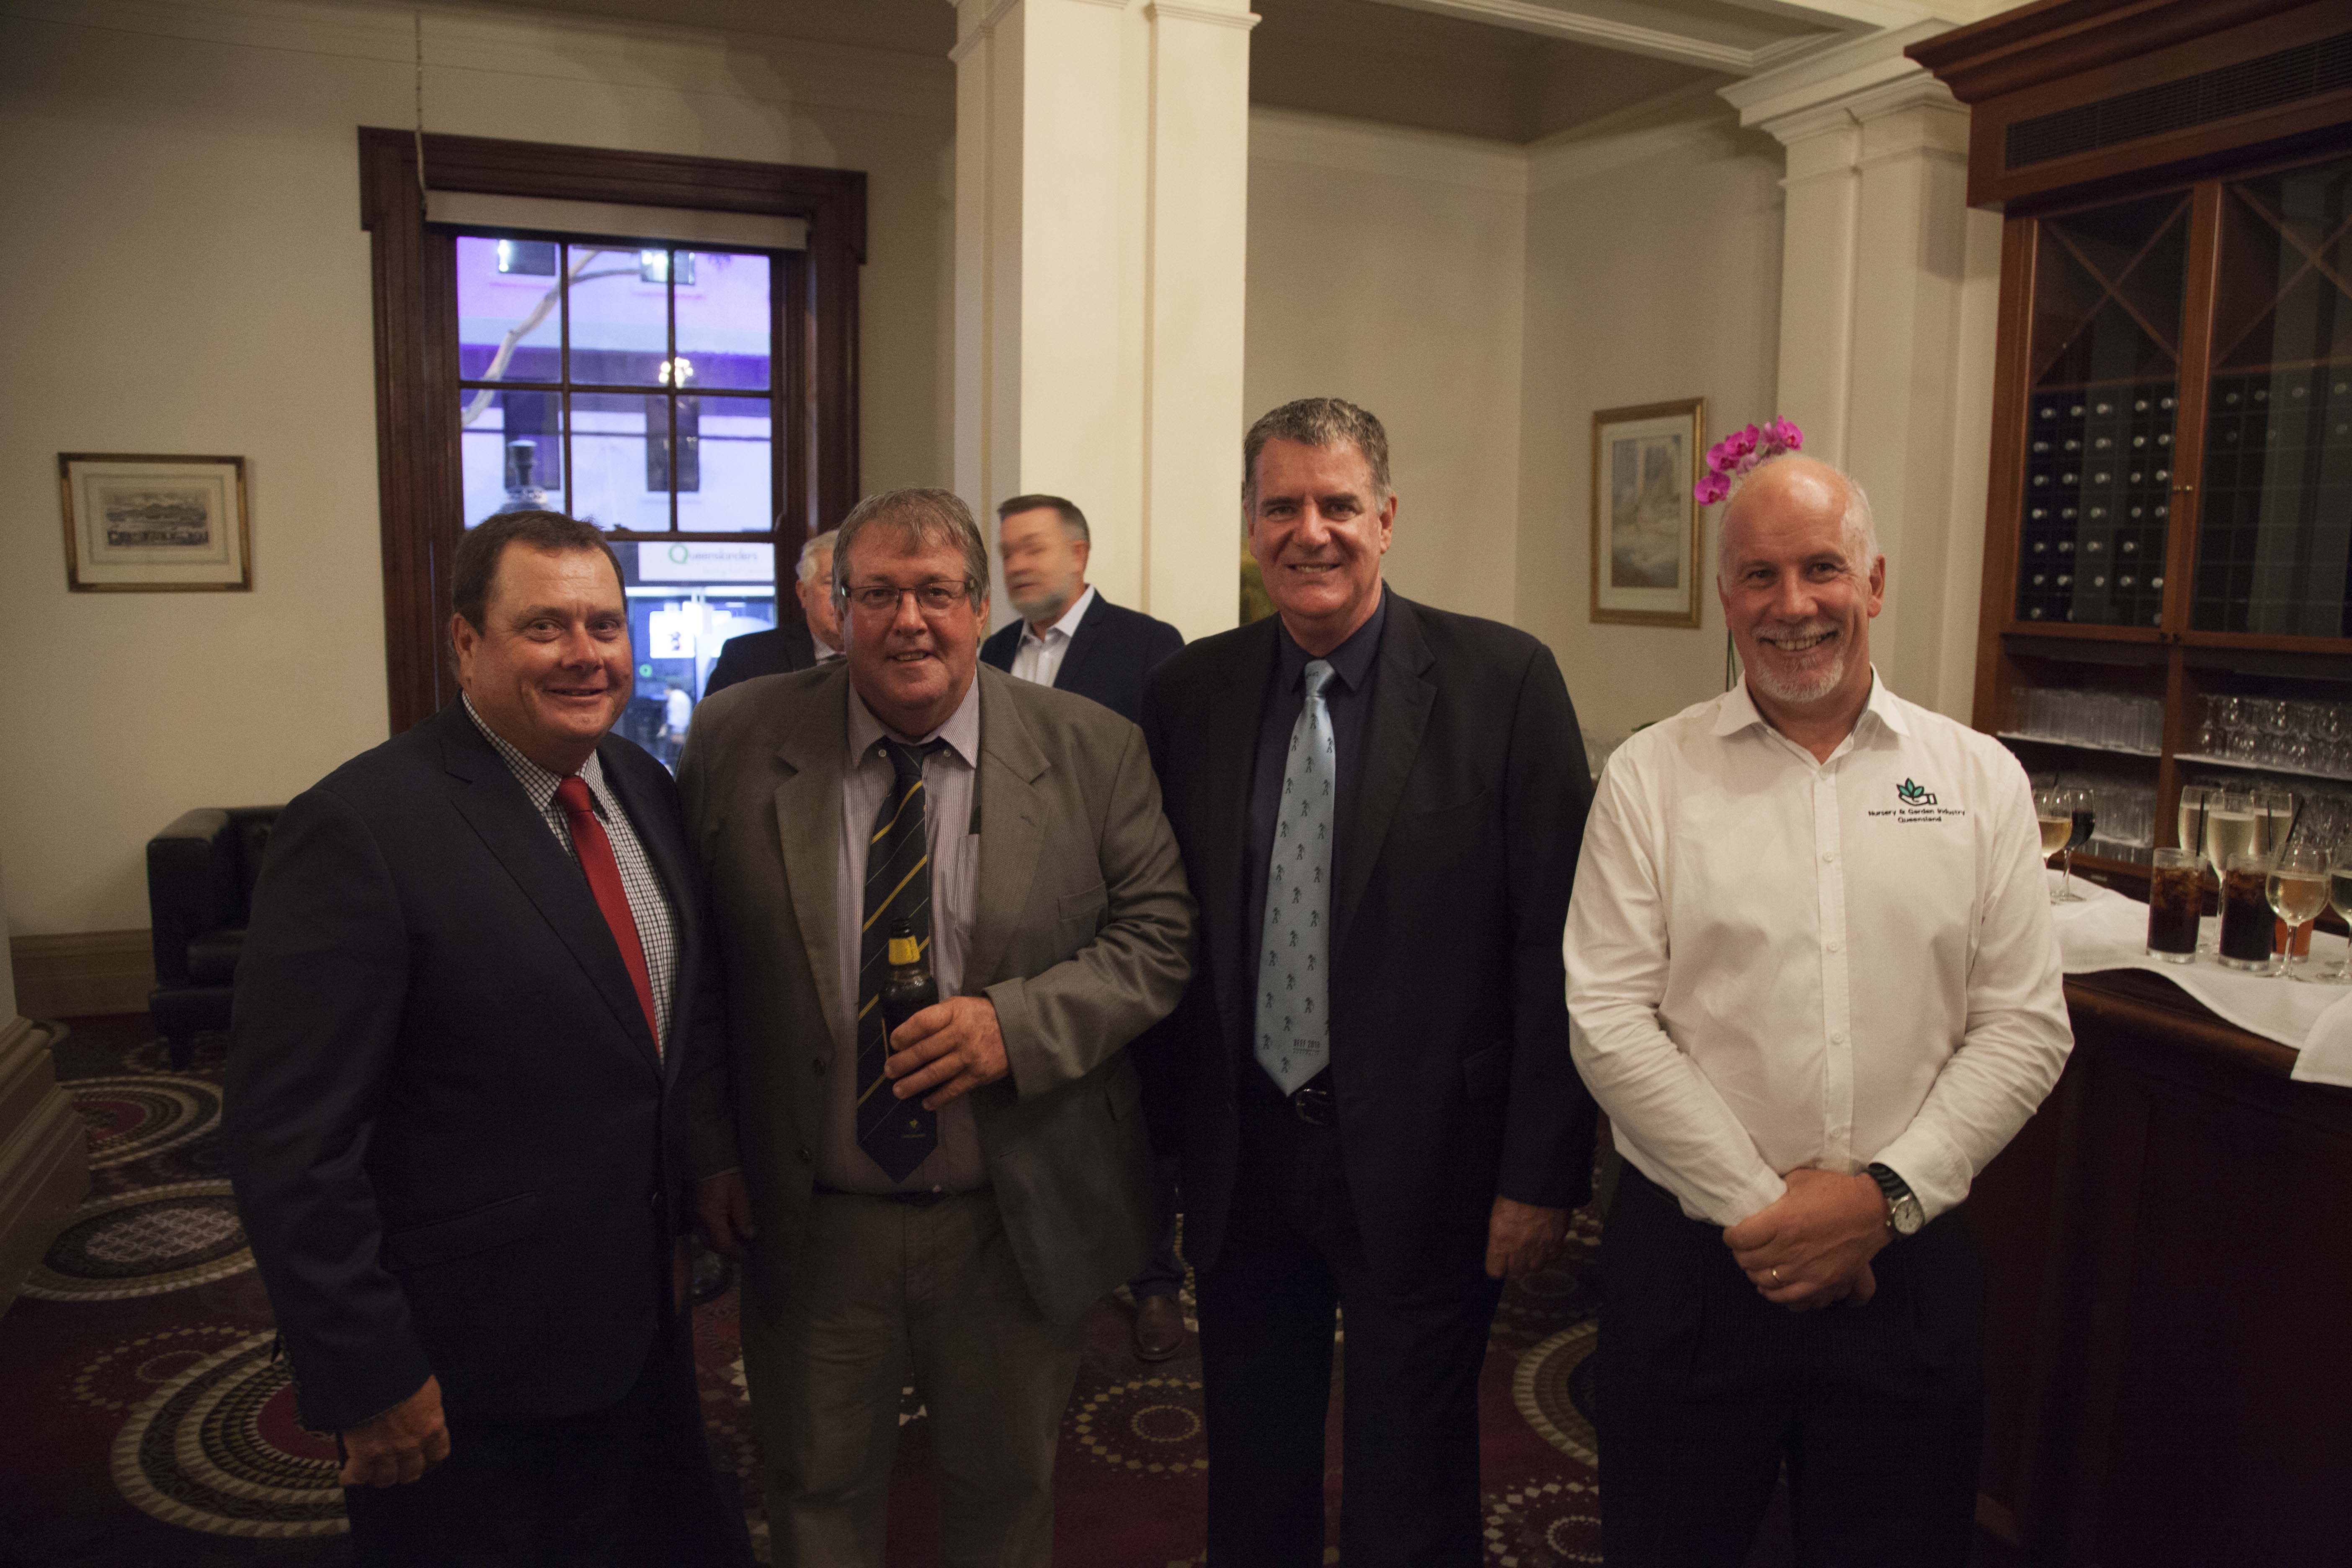 Growcom Chair & QFF Director member Les Williams, CANEGROWERS Vice-Chair & QFF Vice-President Allan Dingle, Minister Mark Furner MP & NGIQ CEO Ian Atkinson